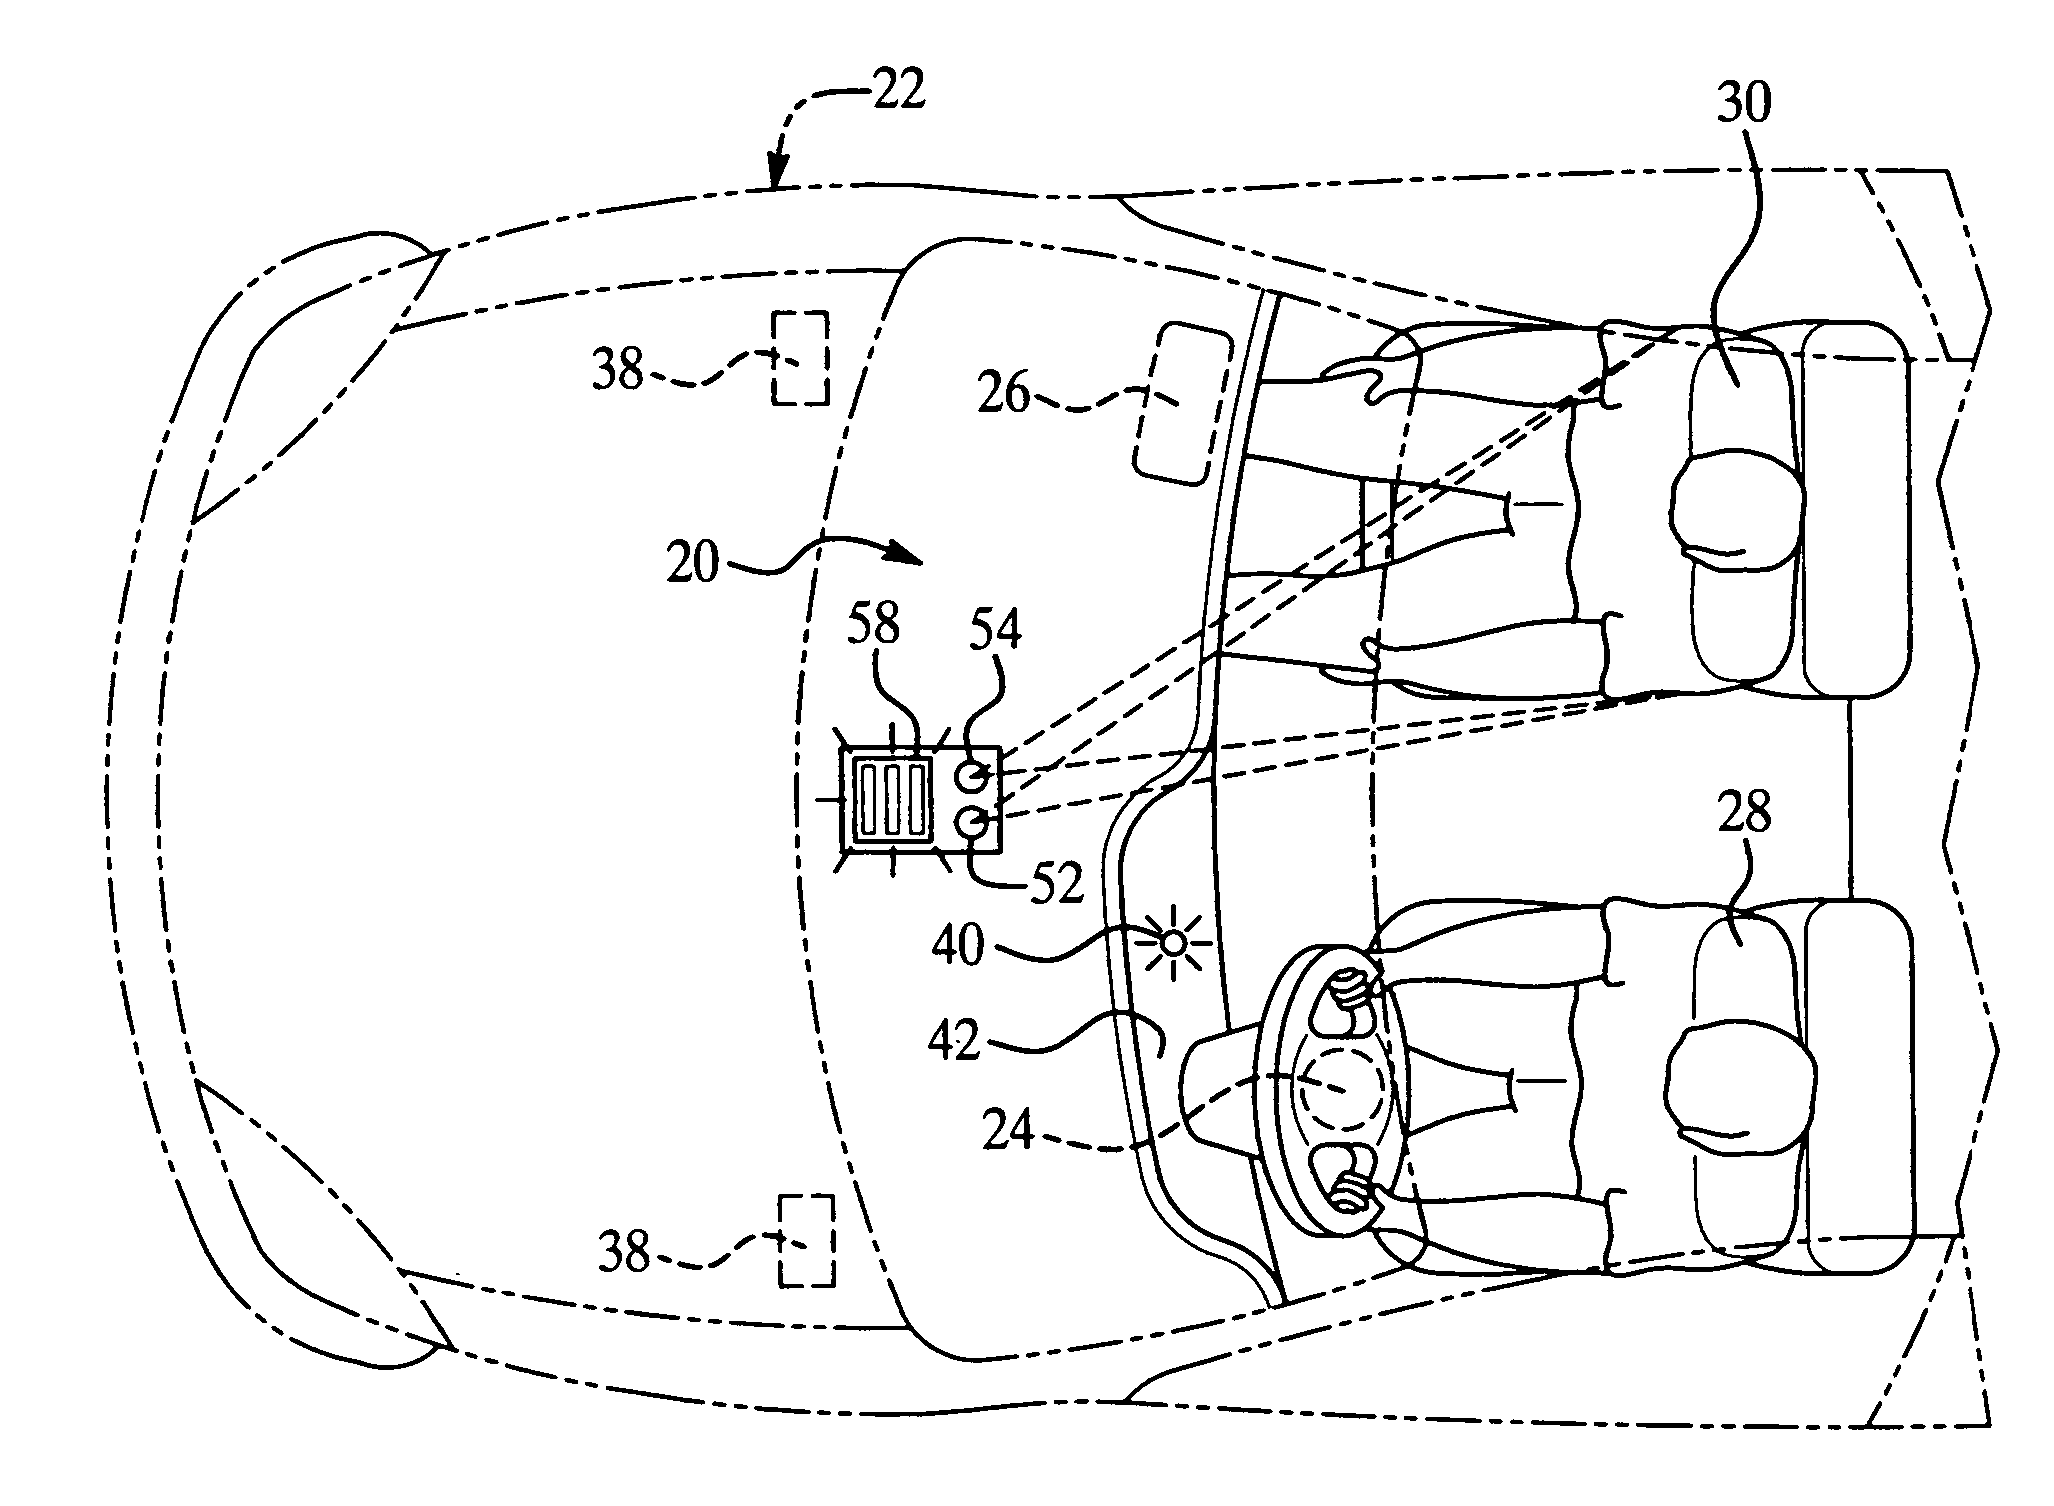 Vision-based occupant classification method and system for controlling airbag deployment in a vehicle restraint system